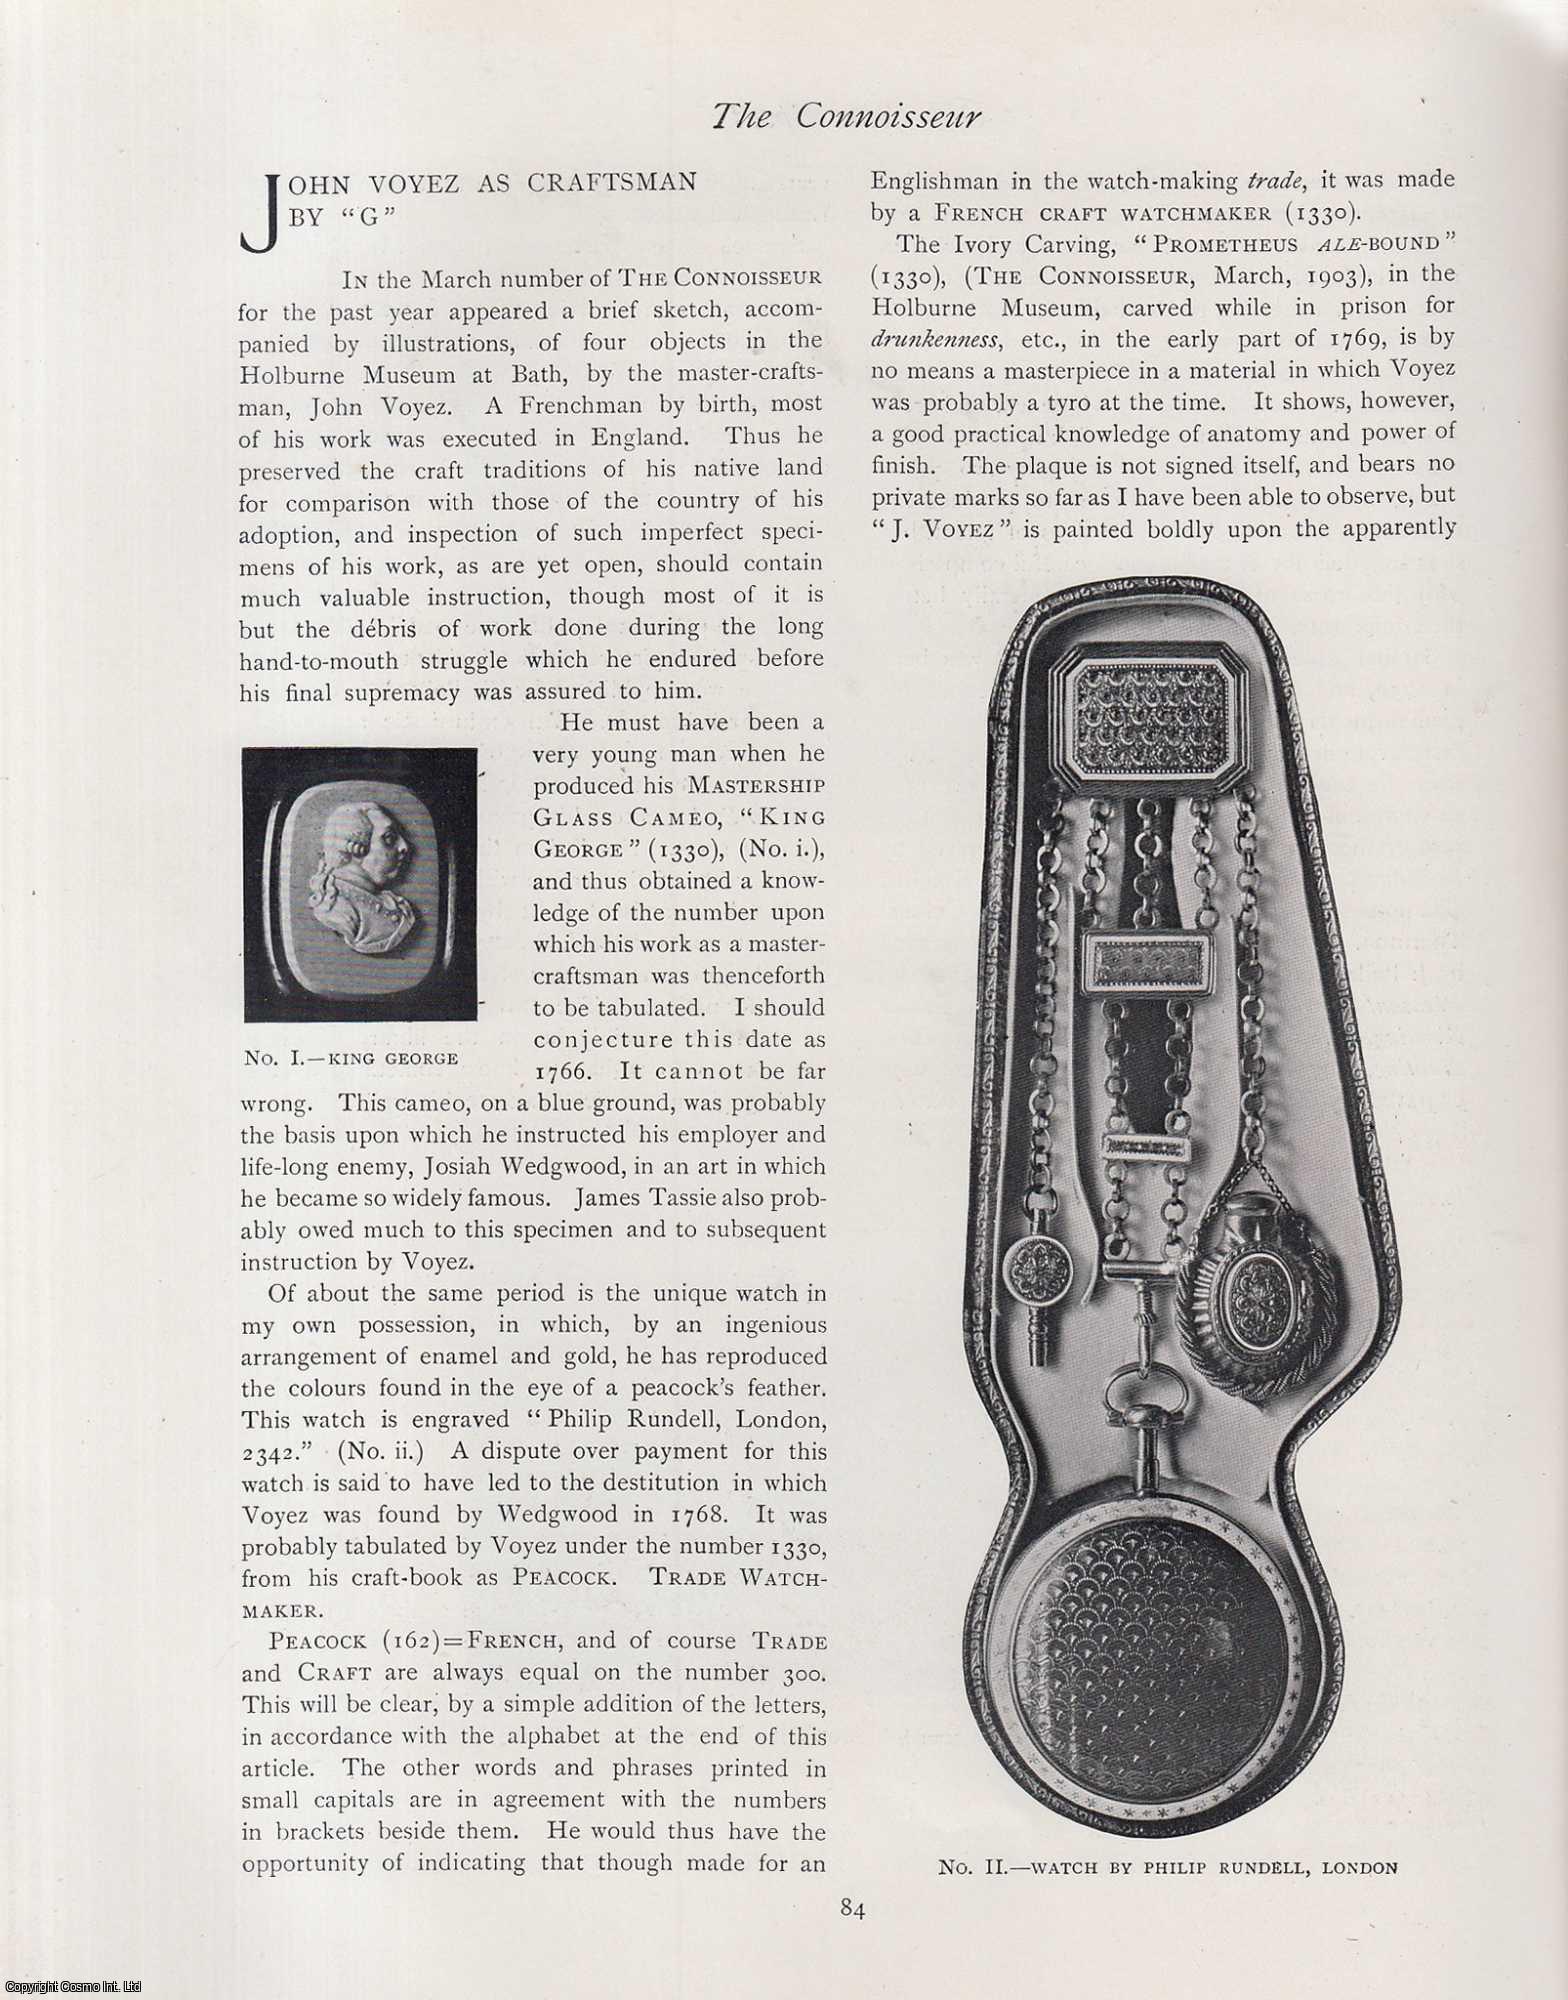 No Author Stated - John Voyez as Craftsman. An original article from The Connoisseur, 1904.